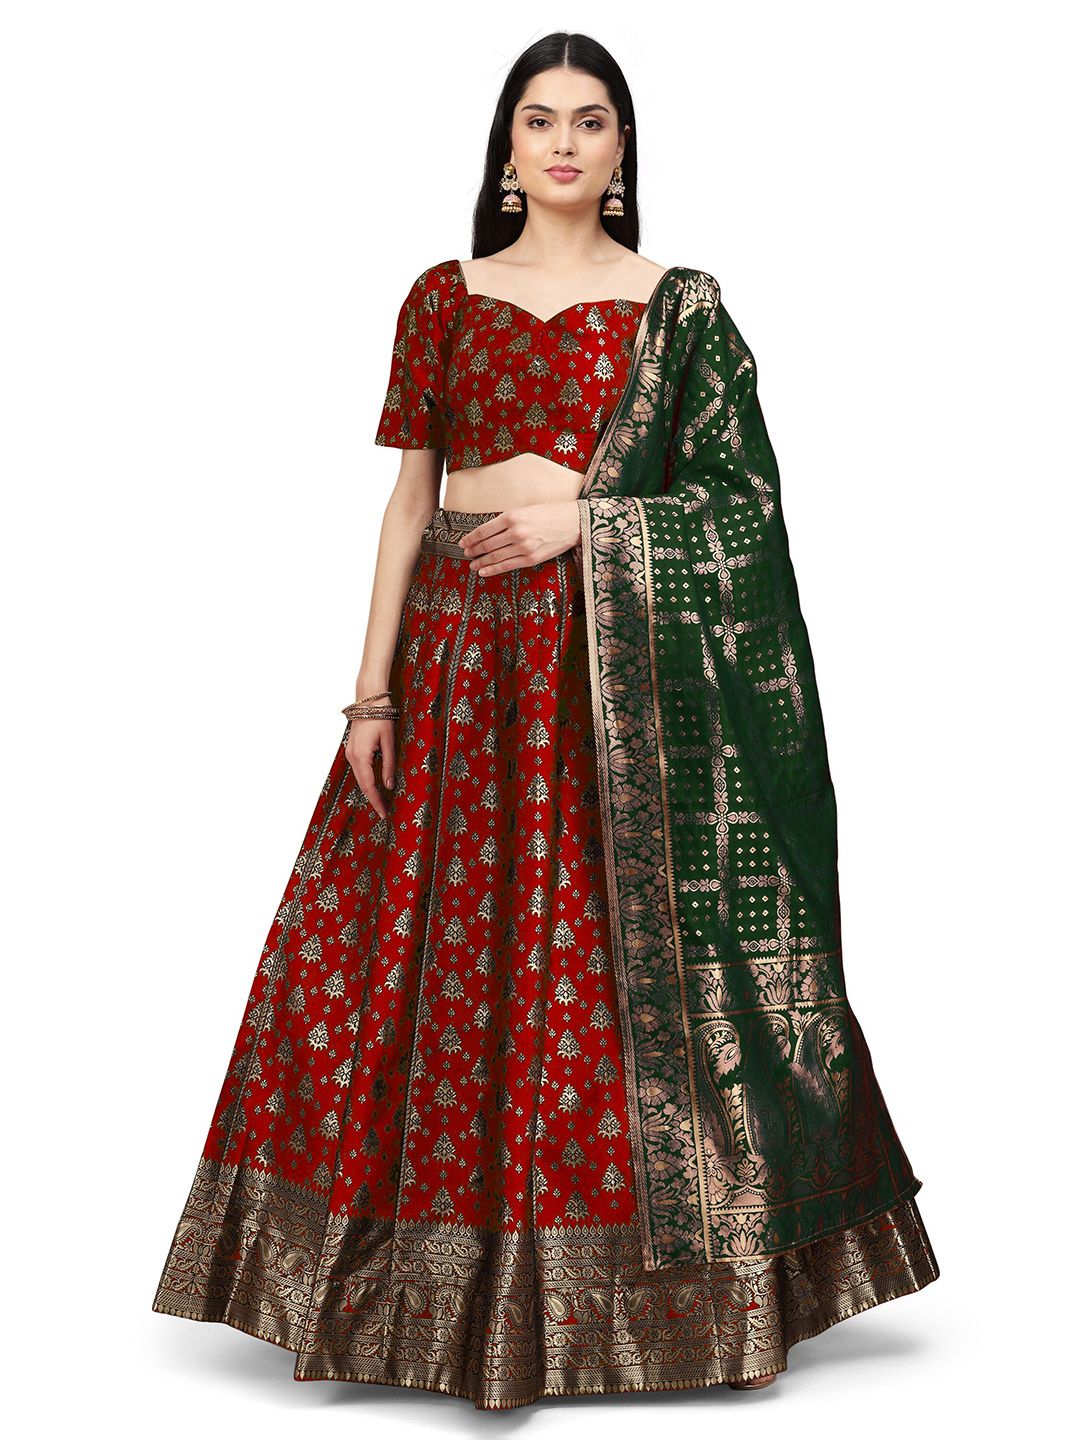 Kedar Fab Woven Design Squire Neck Semi-Stitched Lehenga & Unstitched Blouse With Dupatta Price in India